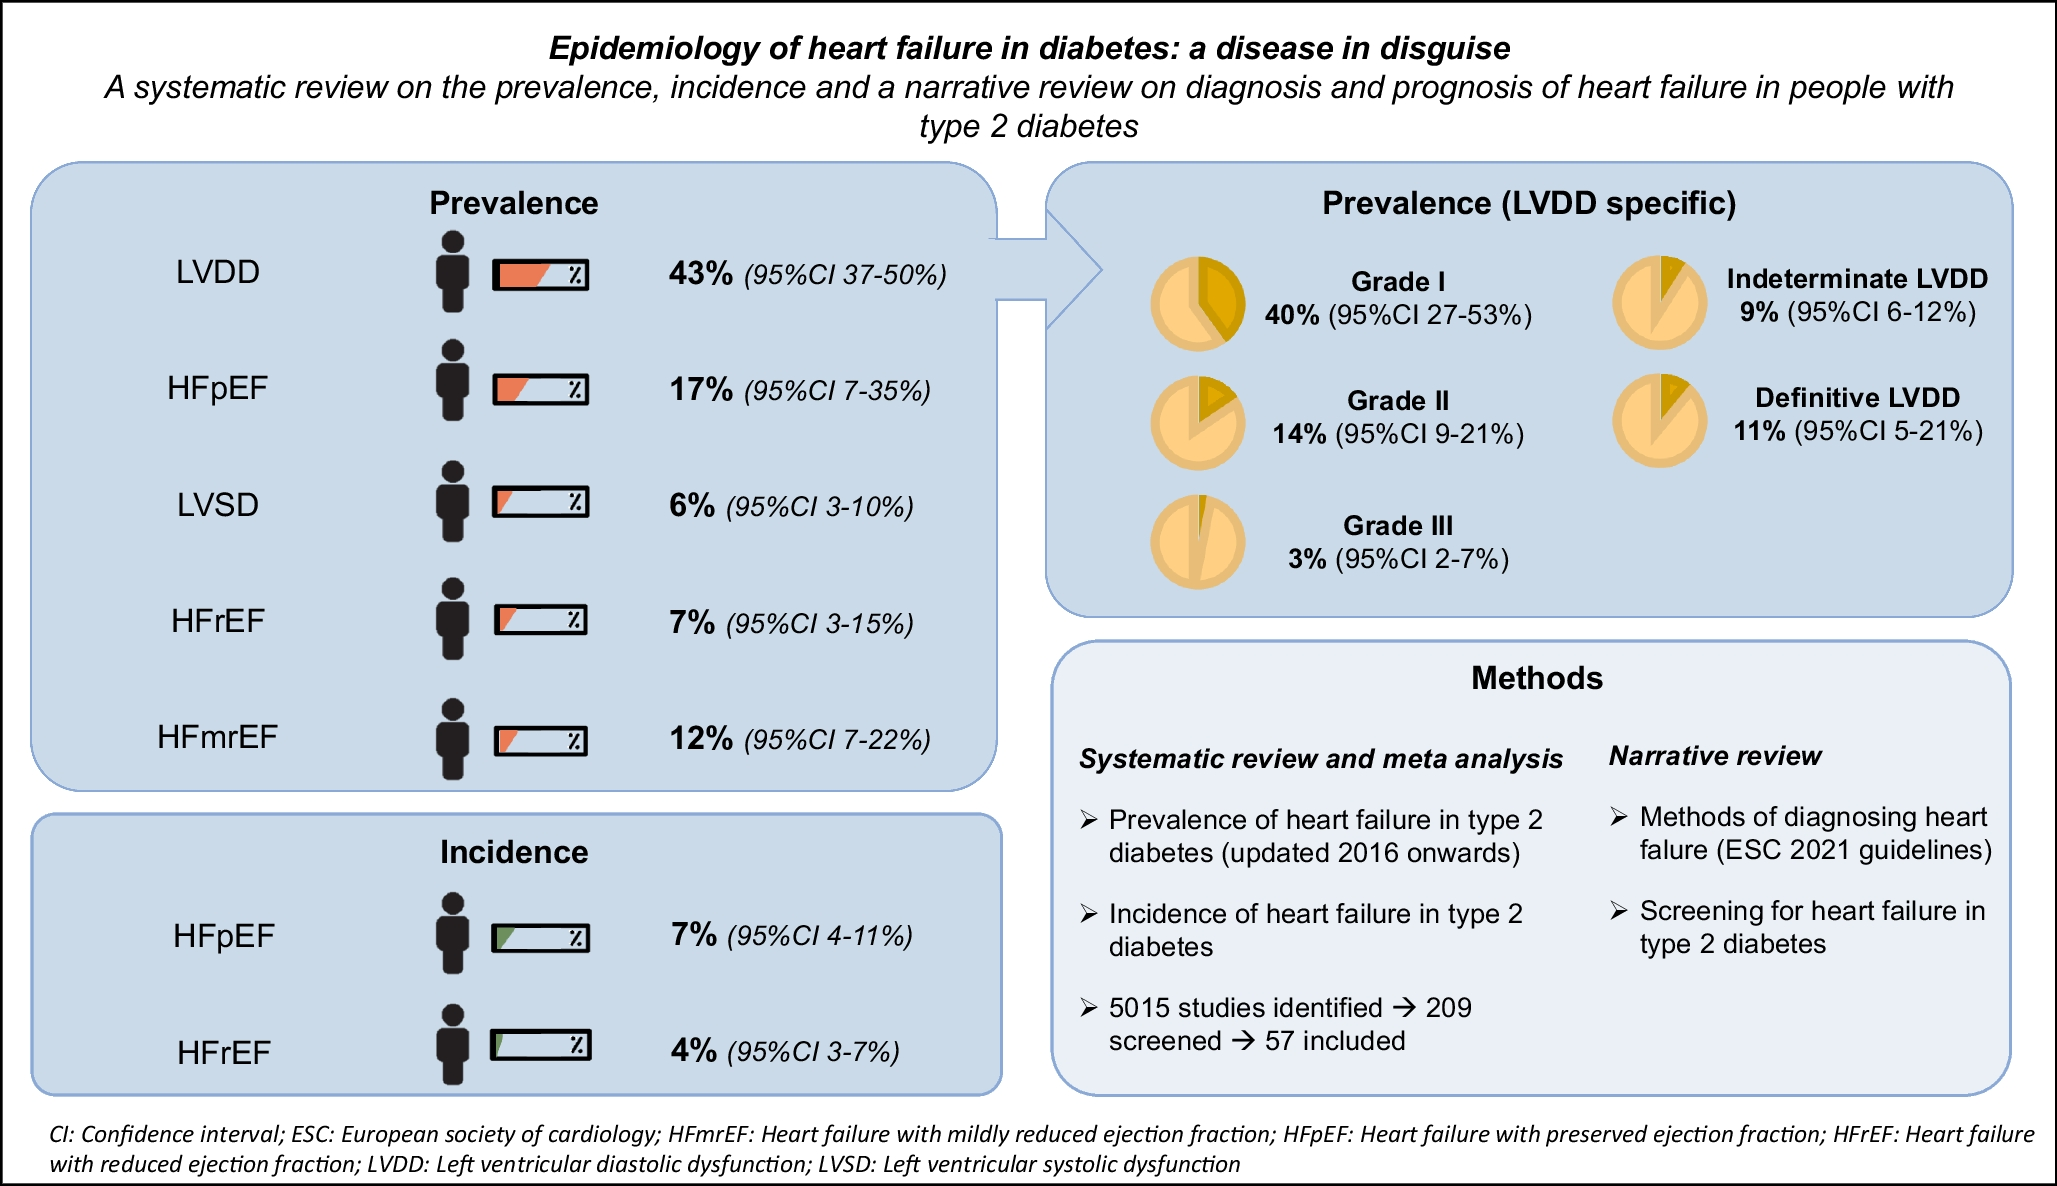 Epidemiology of heart failure in diabetes: a disease in disguise